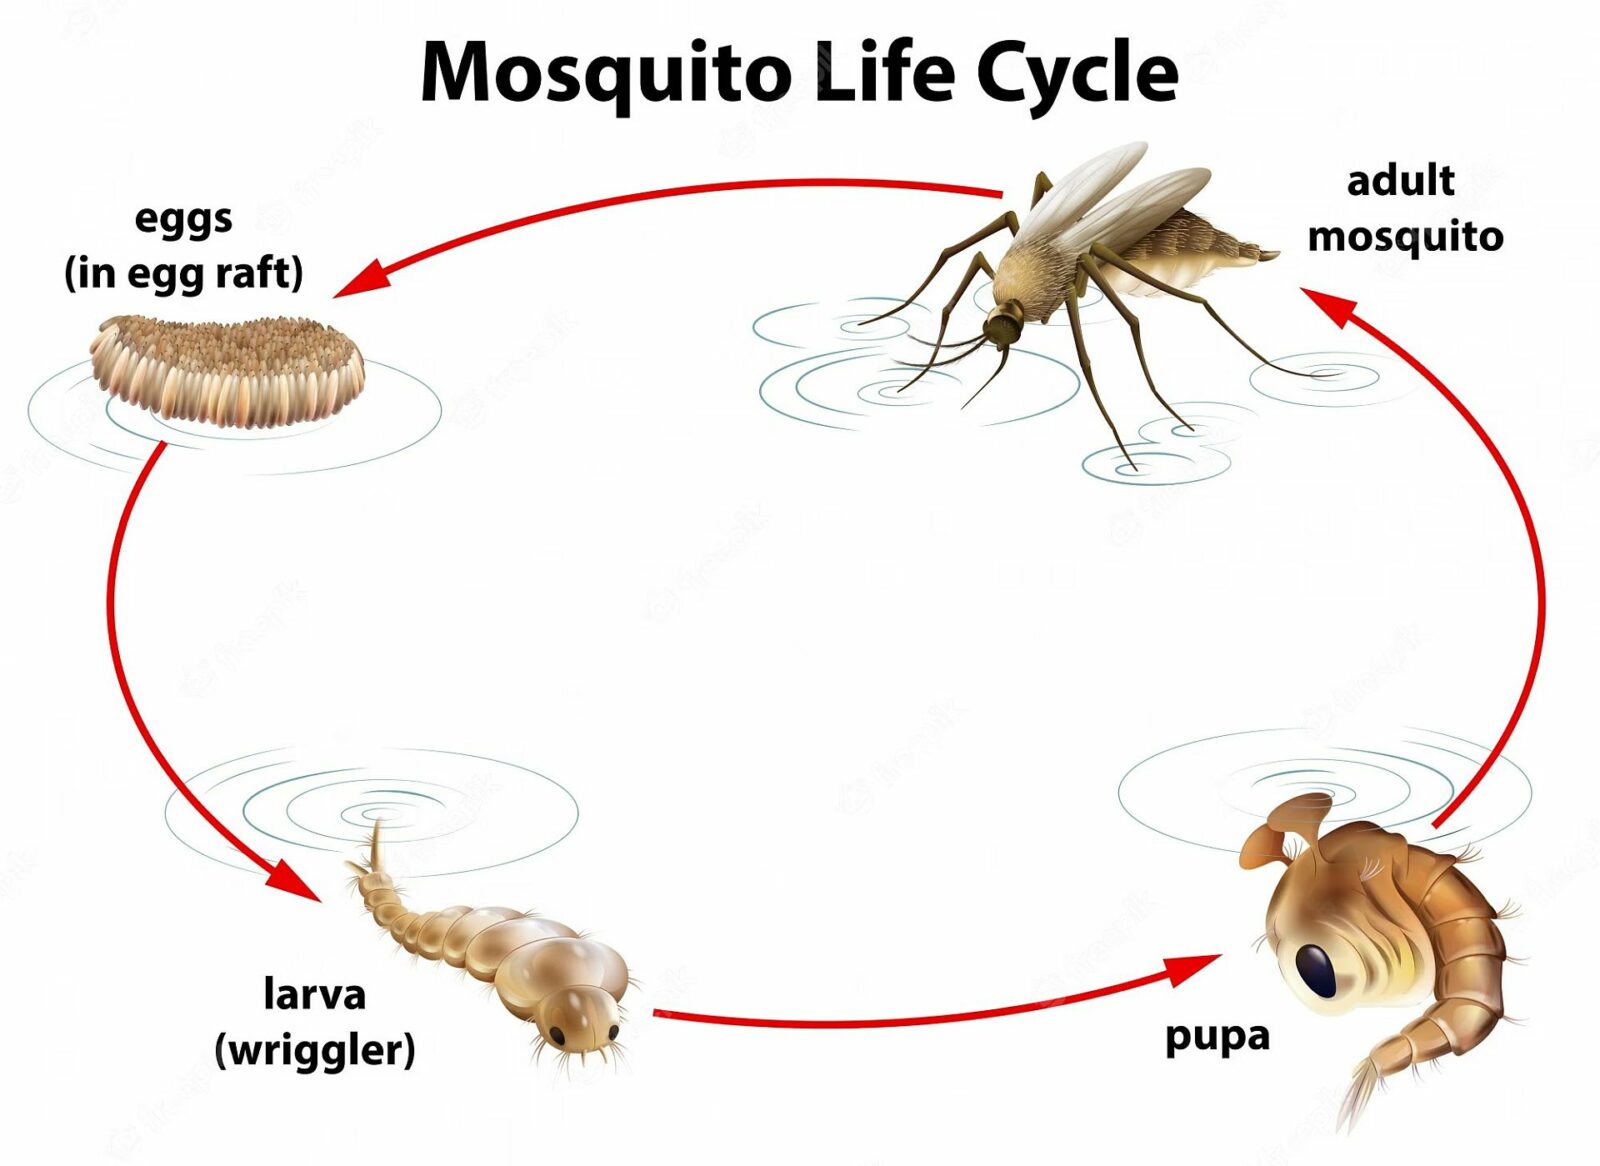 Lifecycle of mosquitoes in nature